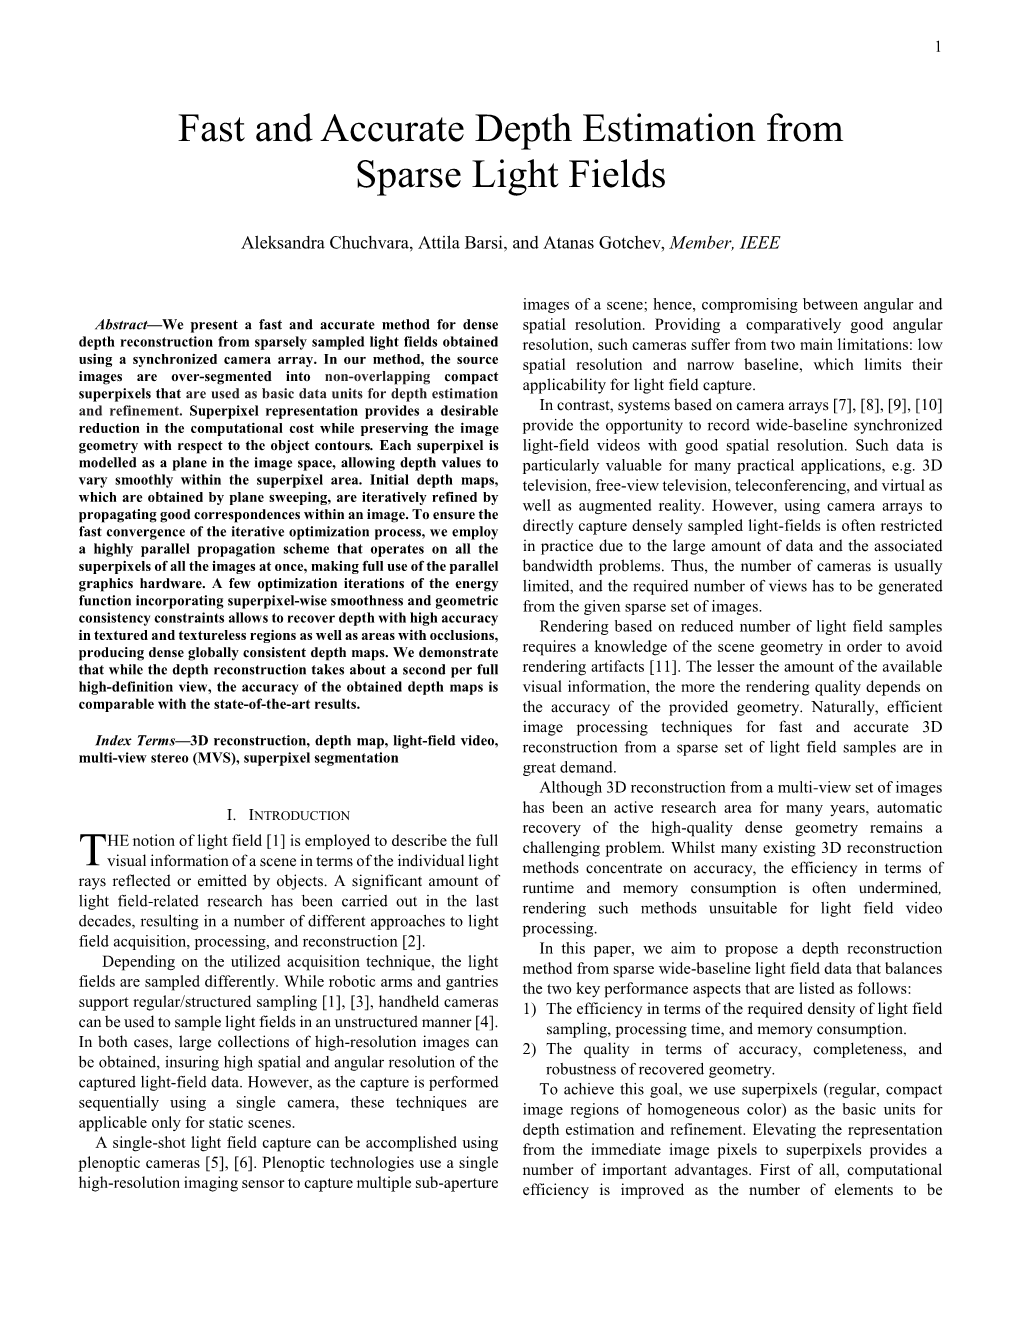 Fast and Accurate Depth Estimation from Sparse Light Fields